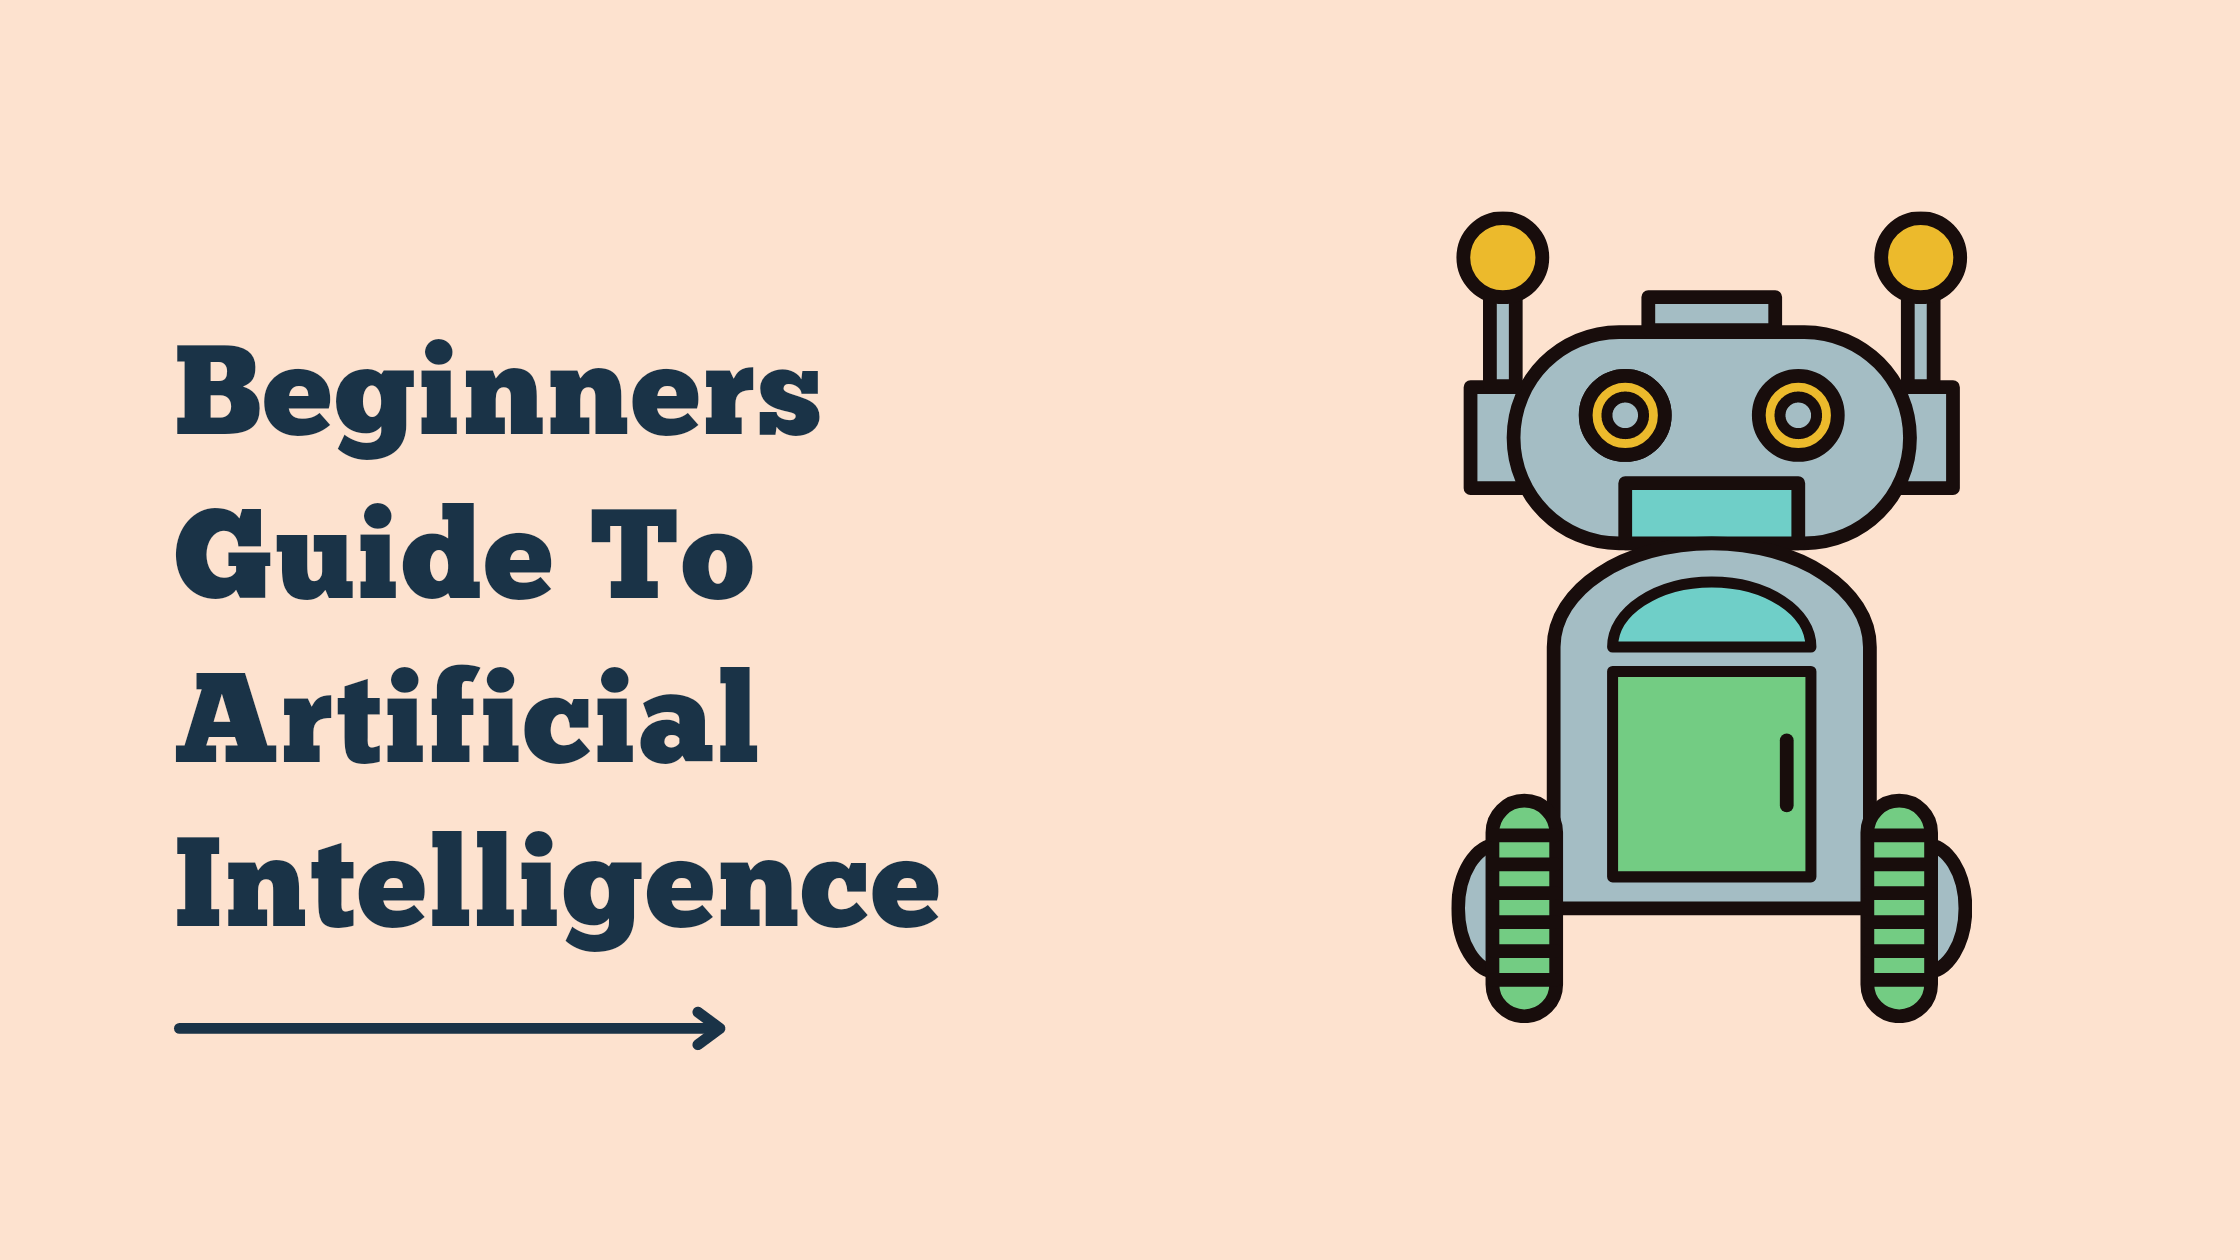 Beginners Guide To Artificial Intelligence